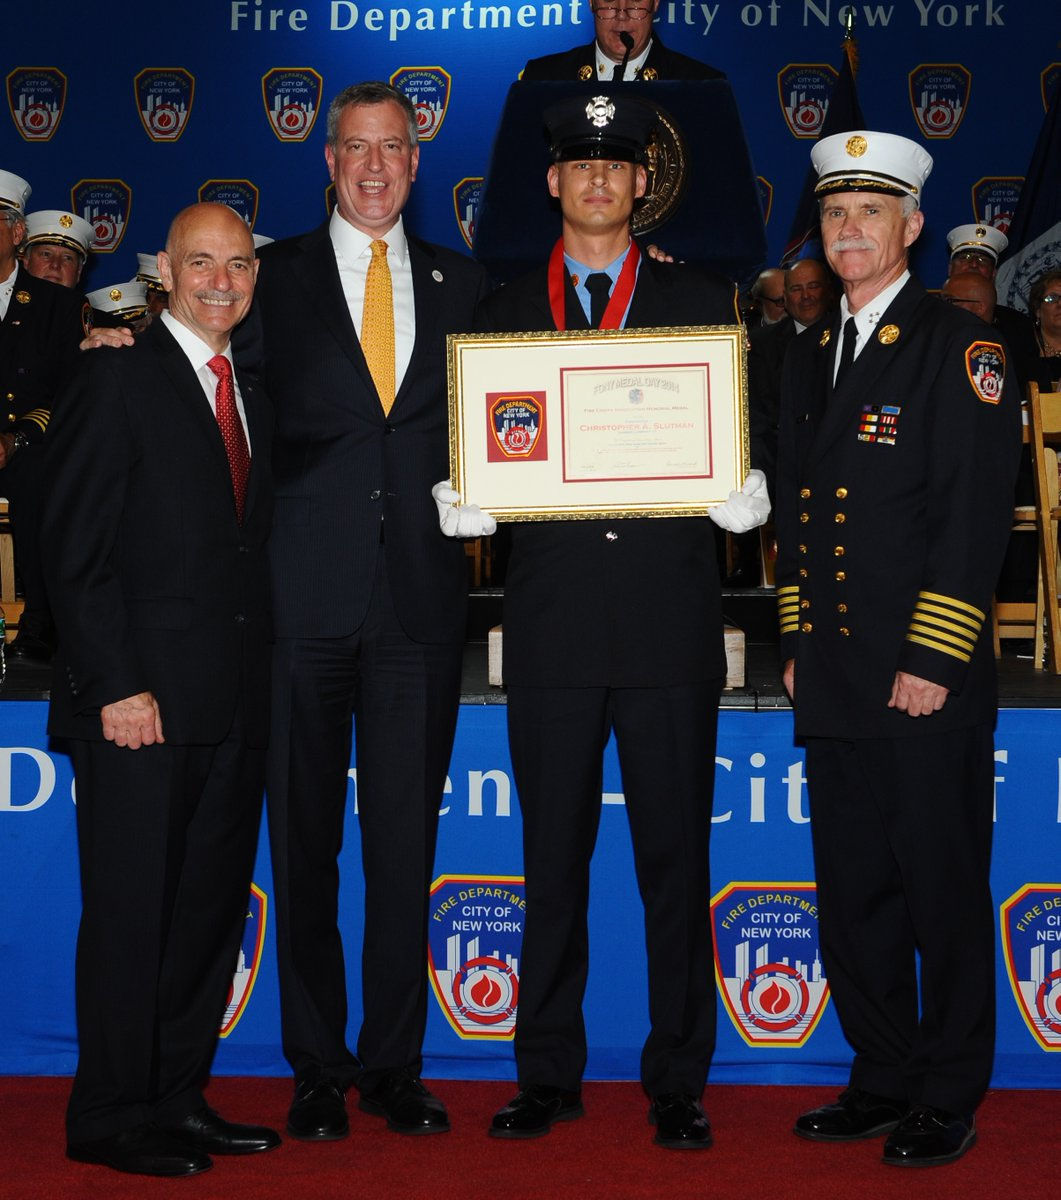 In 2014, New York mayor Bill de Blasio awarded Slutman with the Fire Chief's Association Memorial Medal after he rescued an unconscious woman from a burning apartment in the South Bronx. (Courtesy New York City Fire Department)